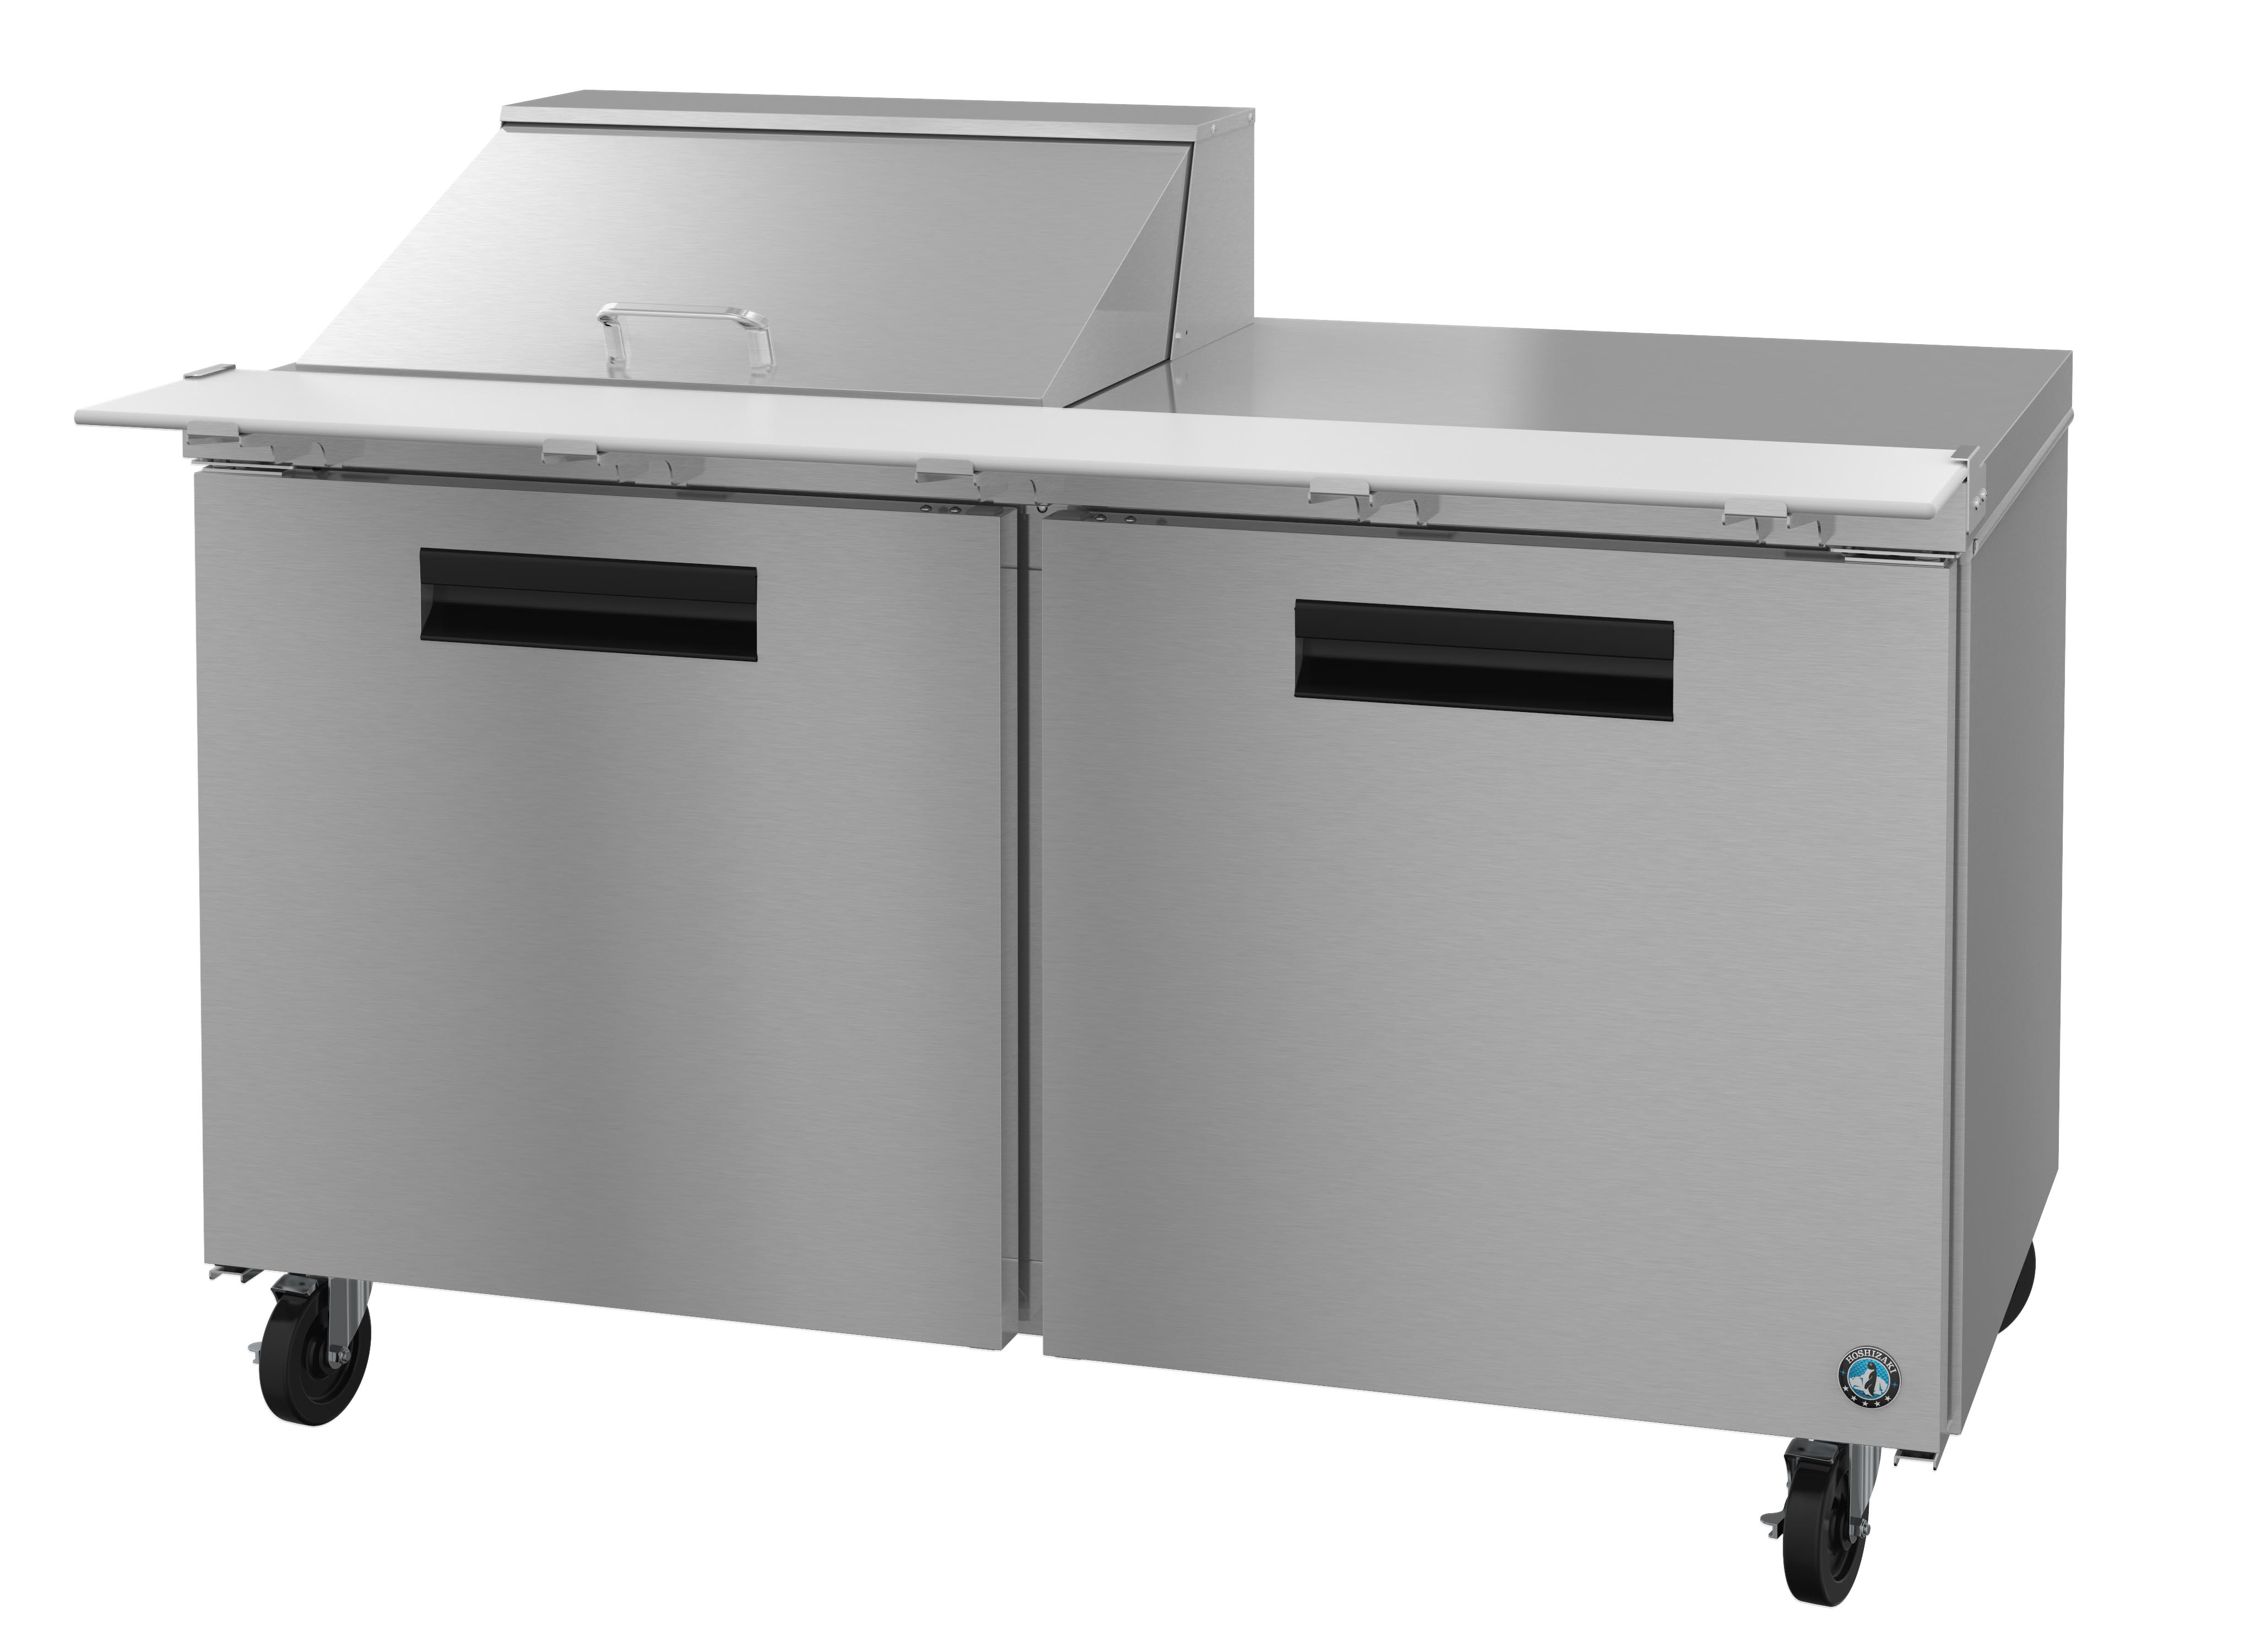 CRMR60-12M, Refrigerator, Two Section Mega Top Prep Table, Stainless Doors